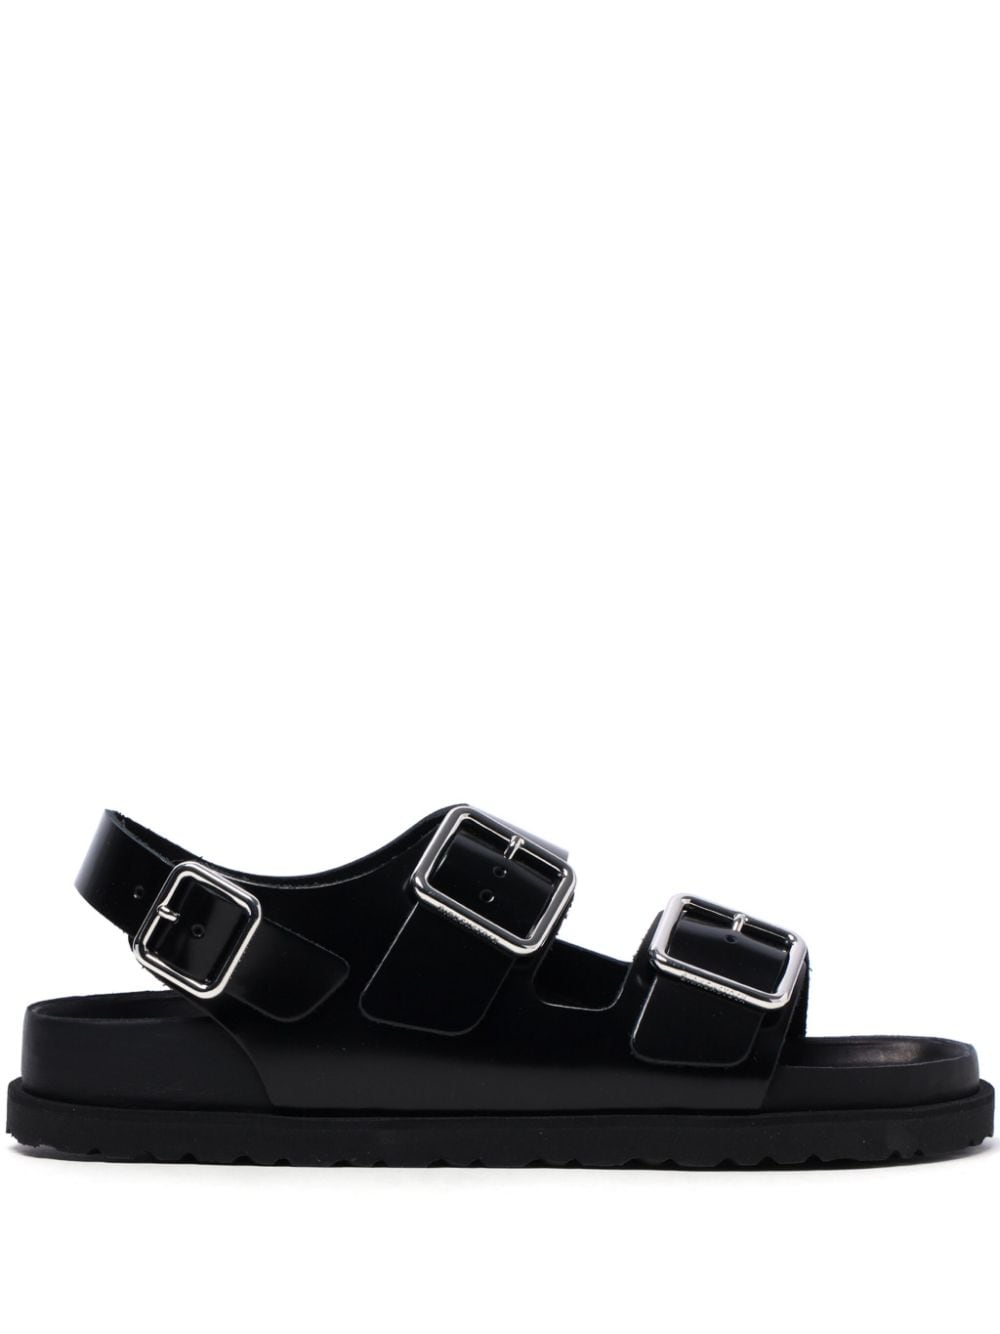 1774 Milano leather sandals<BR/><BR/><BR/>